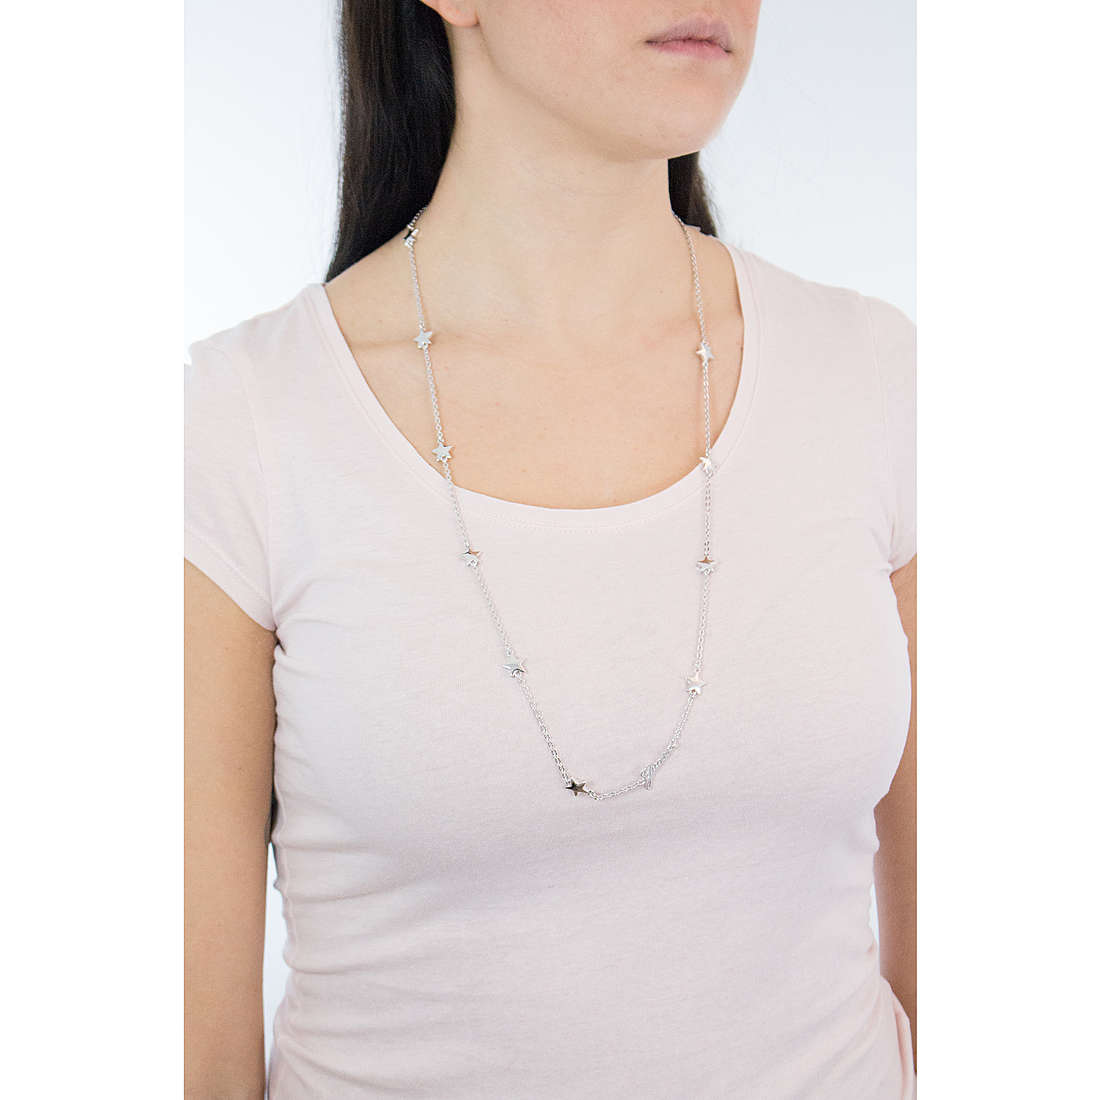 Guess necklaces Starlicious woman UBN84021 wearing